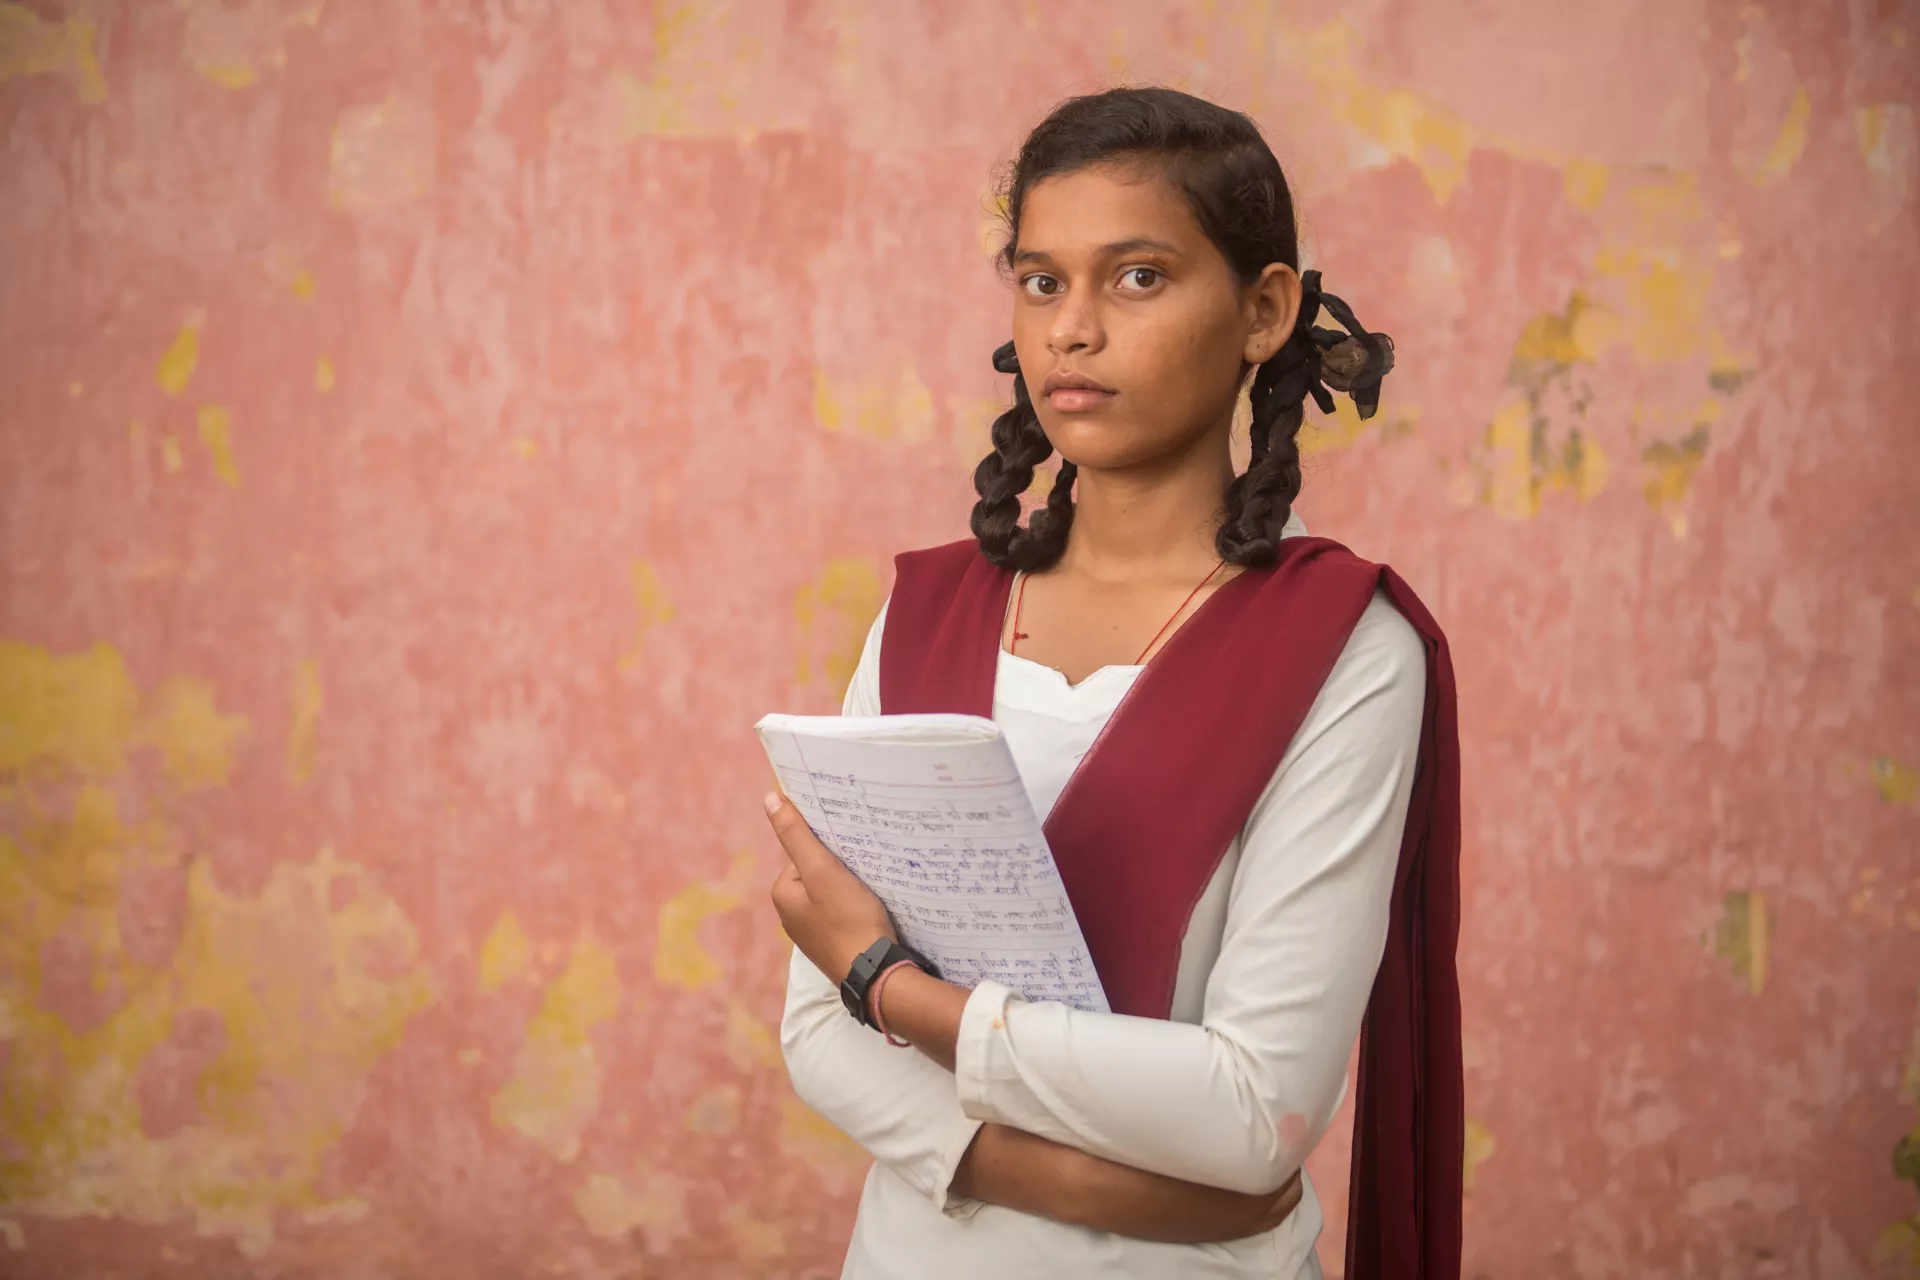 An adolescent girl, Kusma, looks into the camera with determination while holding a school book against a salmon-colored wall.